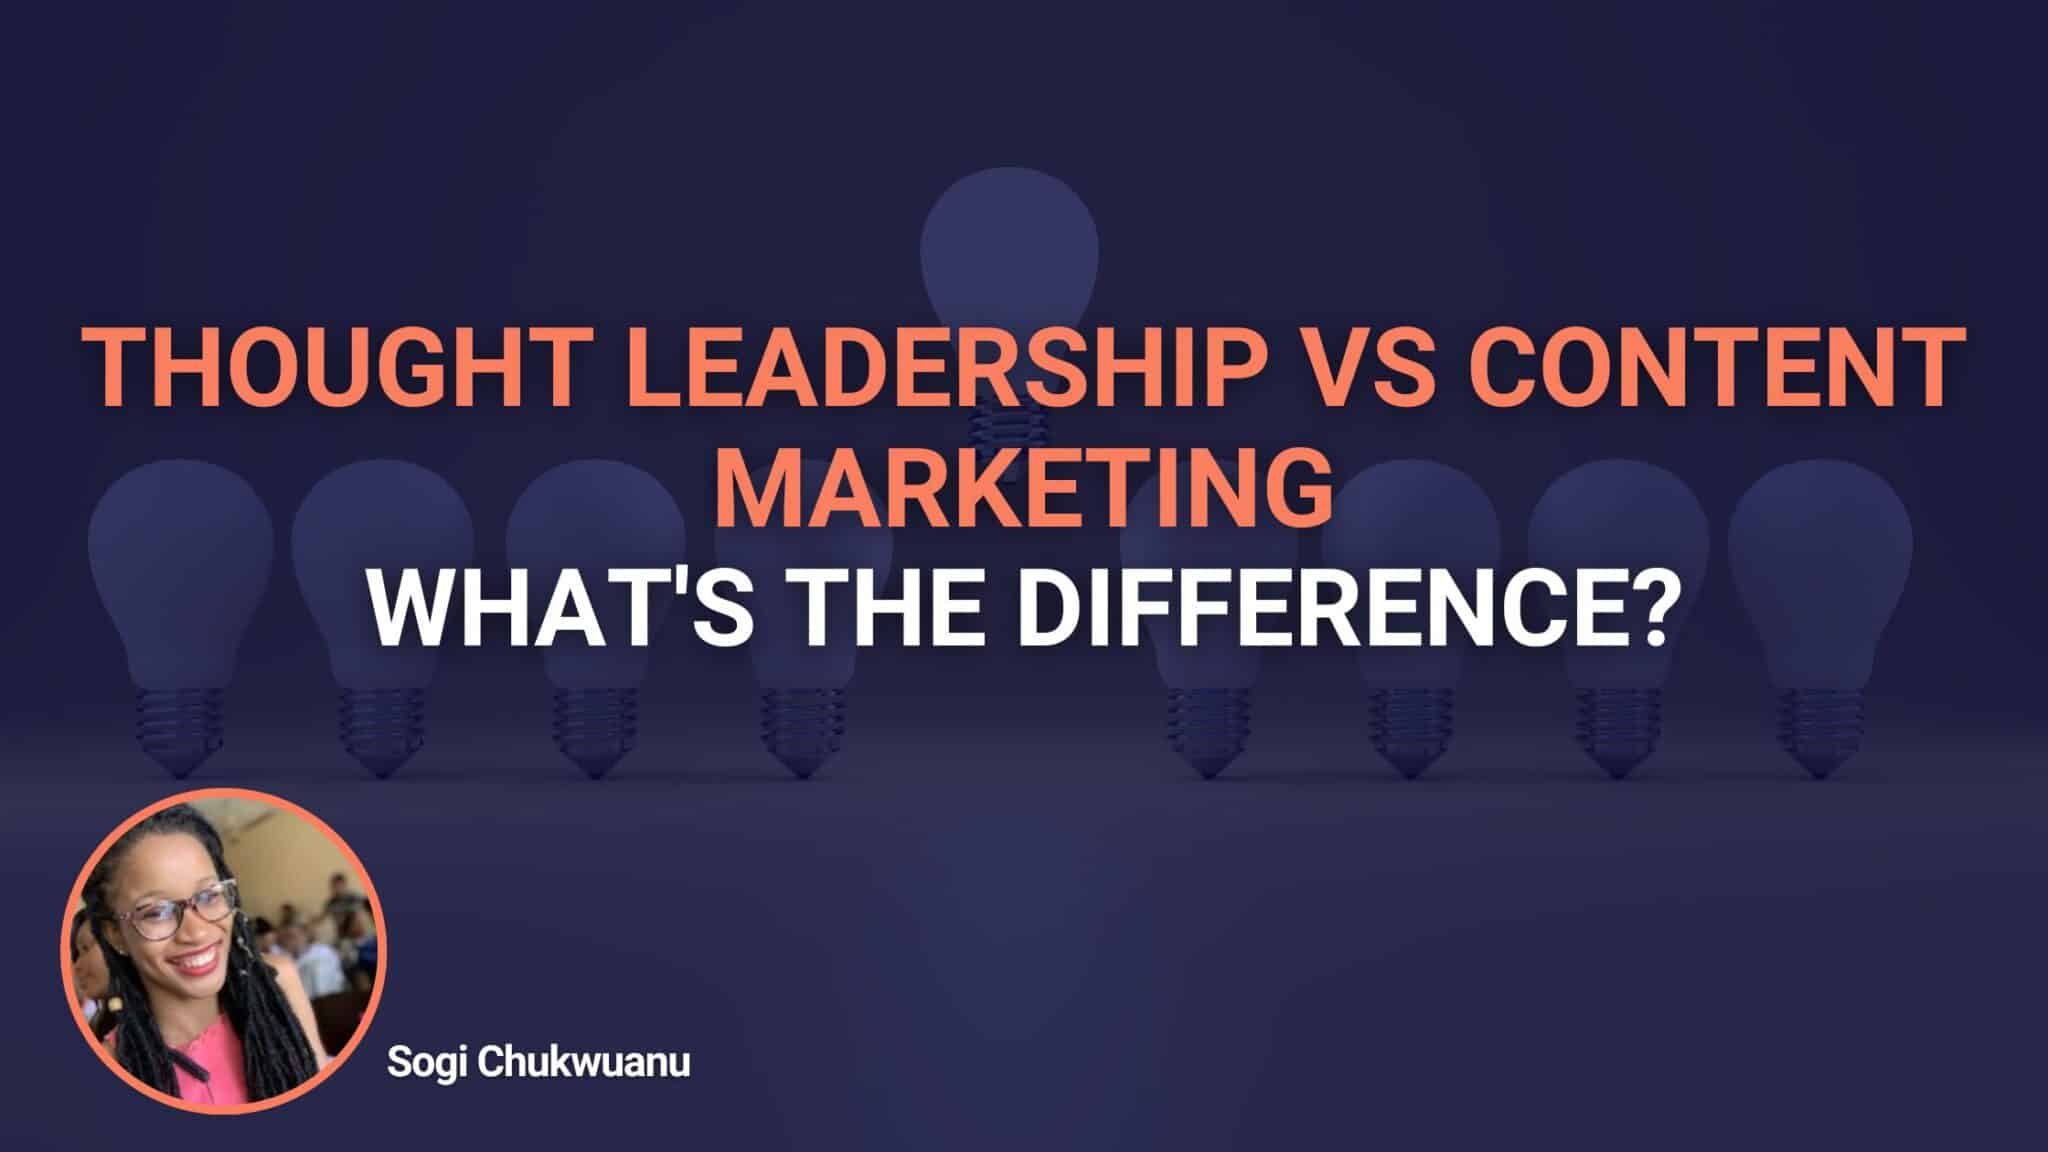 Thought Leadership Vs Content Marketing: What’s The Difference?